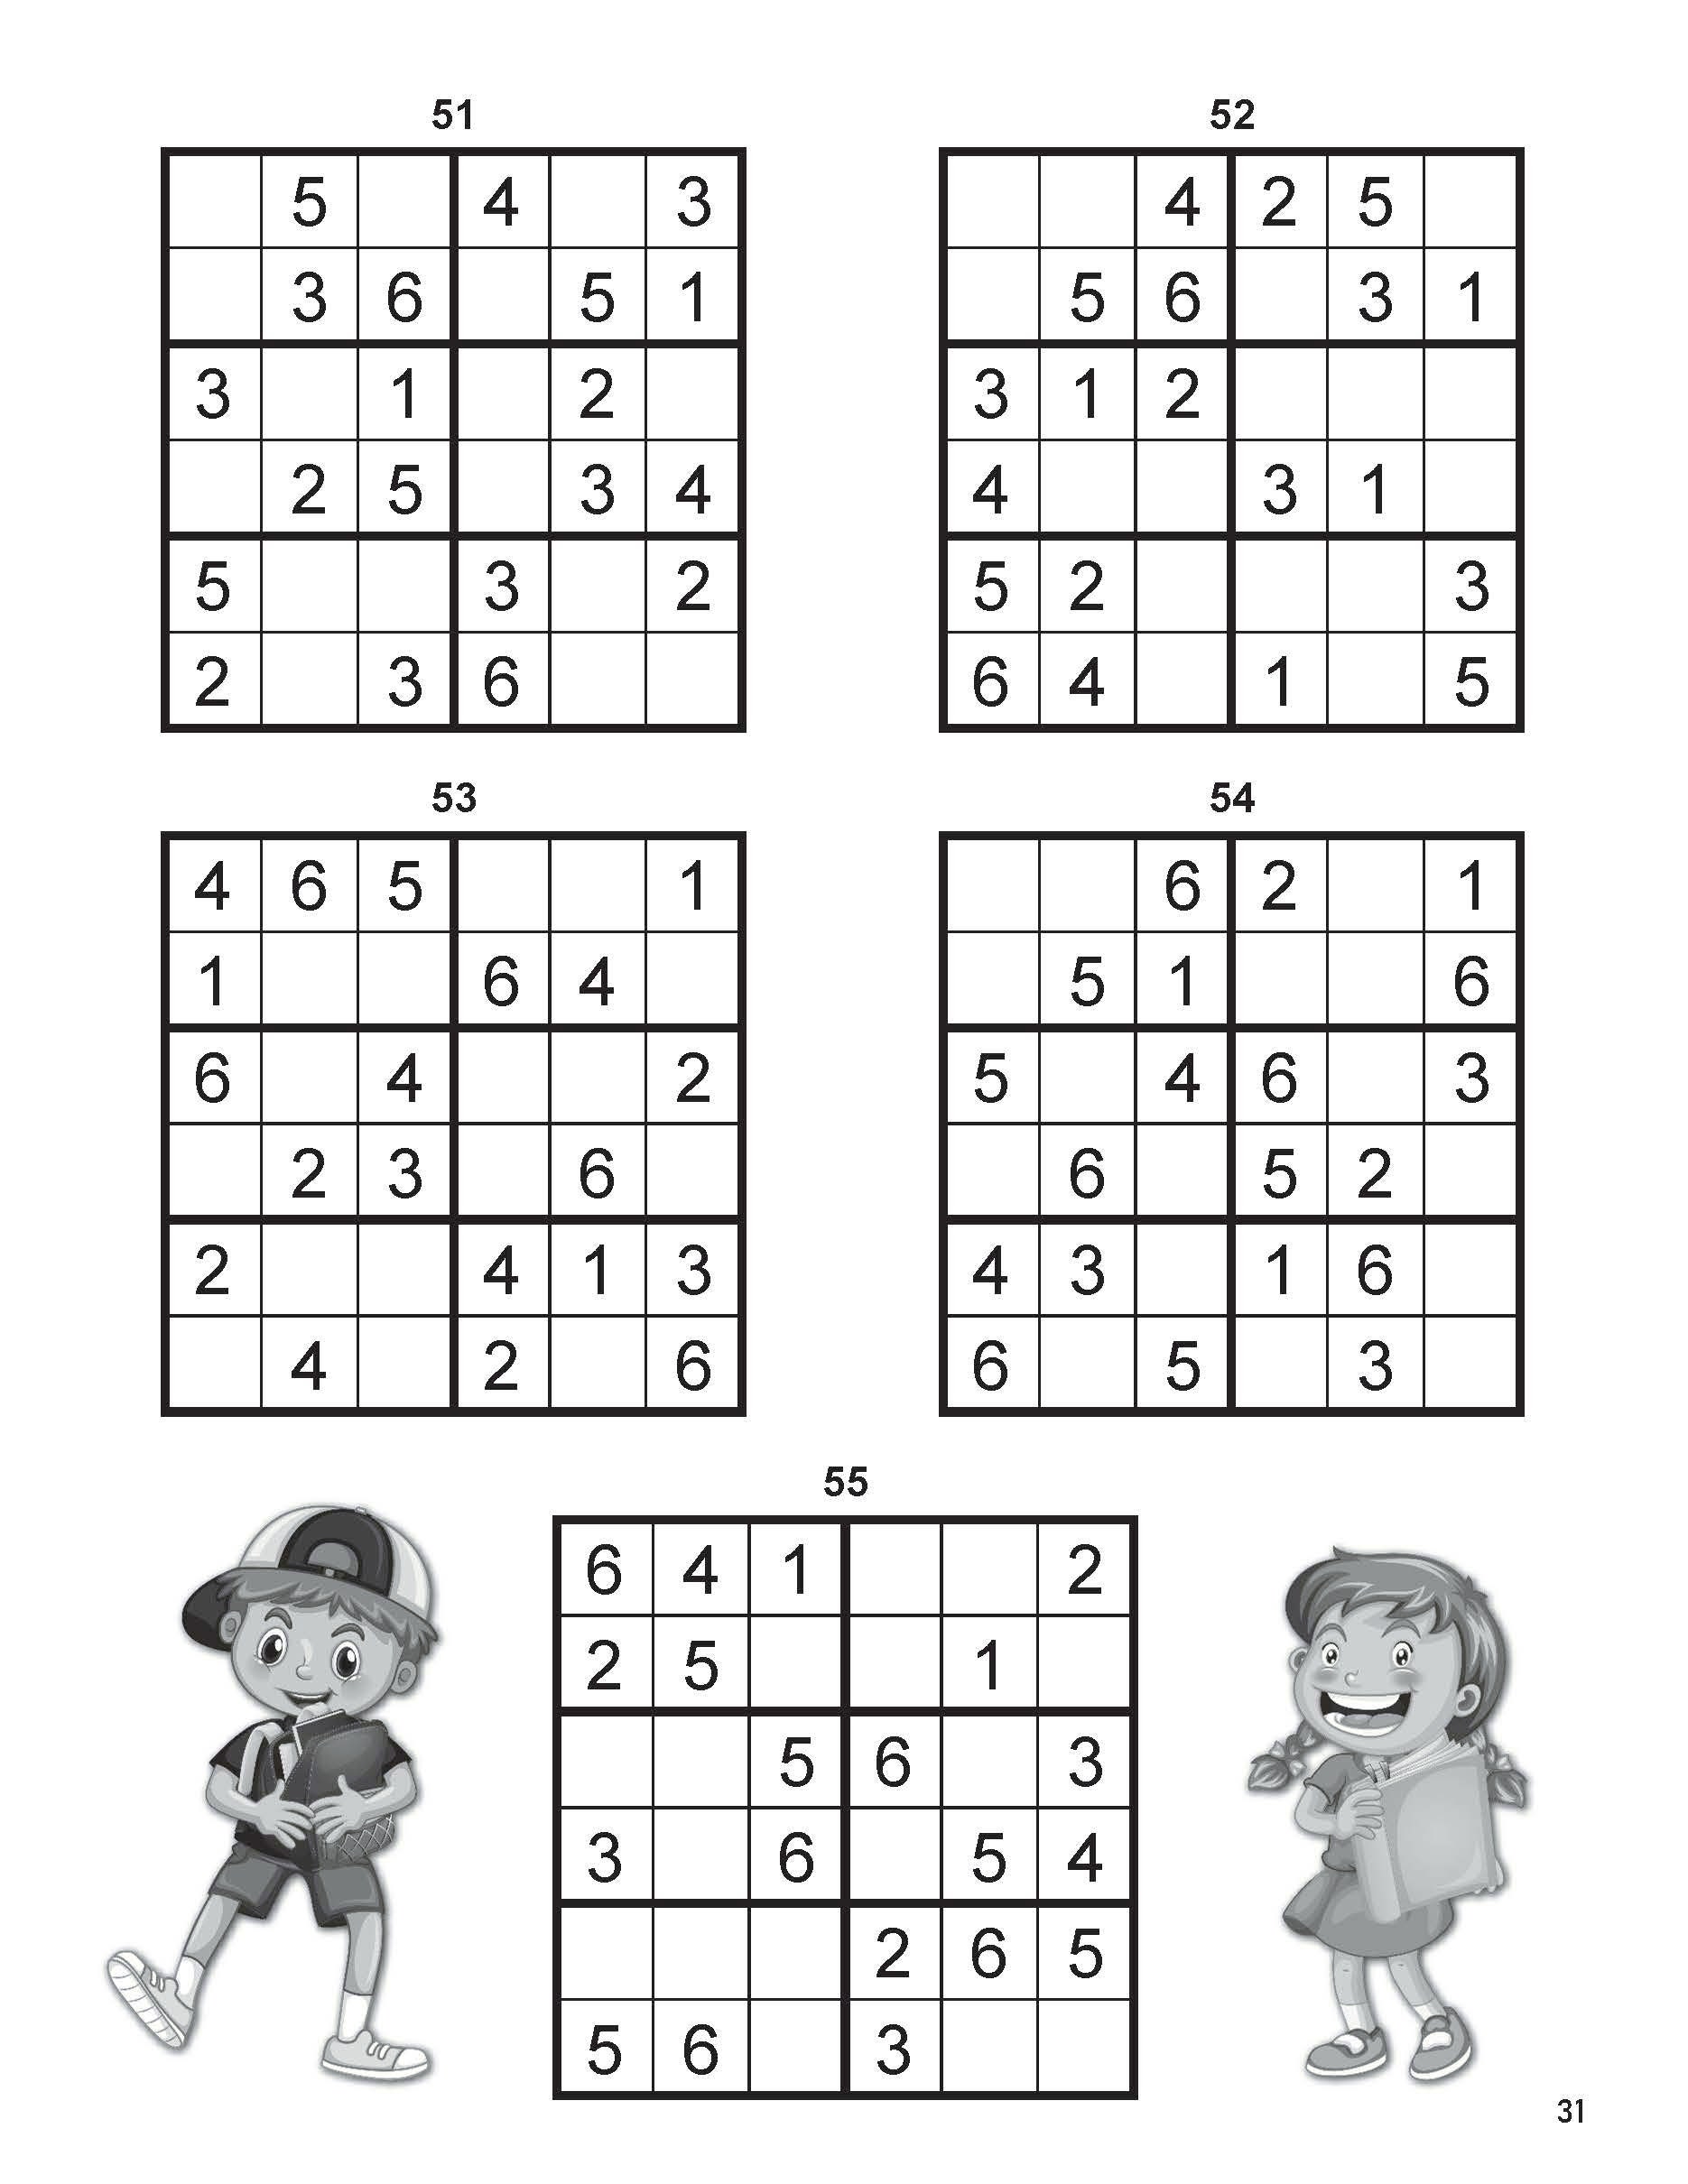 Sudoku For 5 Year Olds: 4X4 Sudoku Puzzles For Beginners, Elementary School  Good Logic Challenge (Sudoku Books For Kids) - Novedog Puzzles -  9781678560348